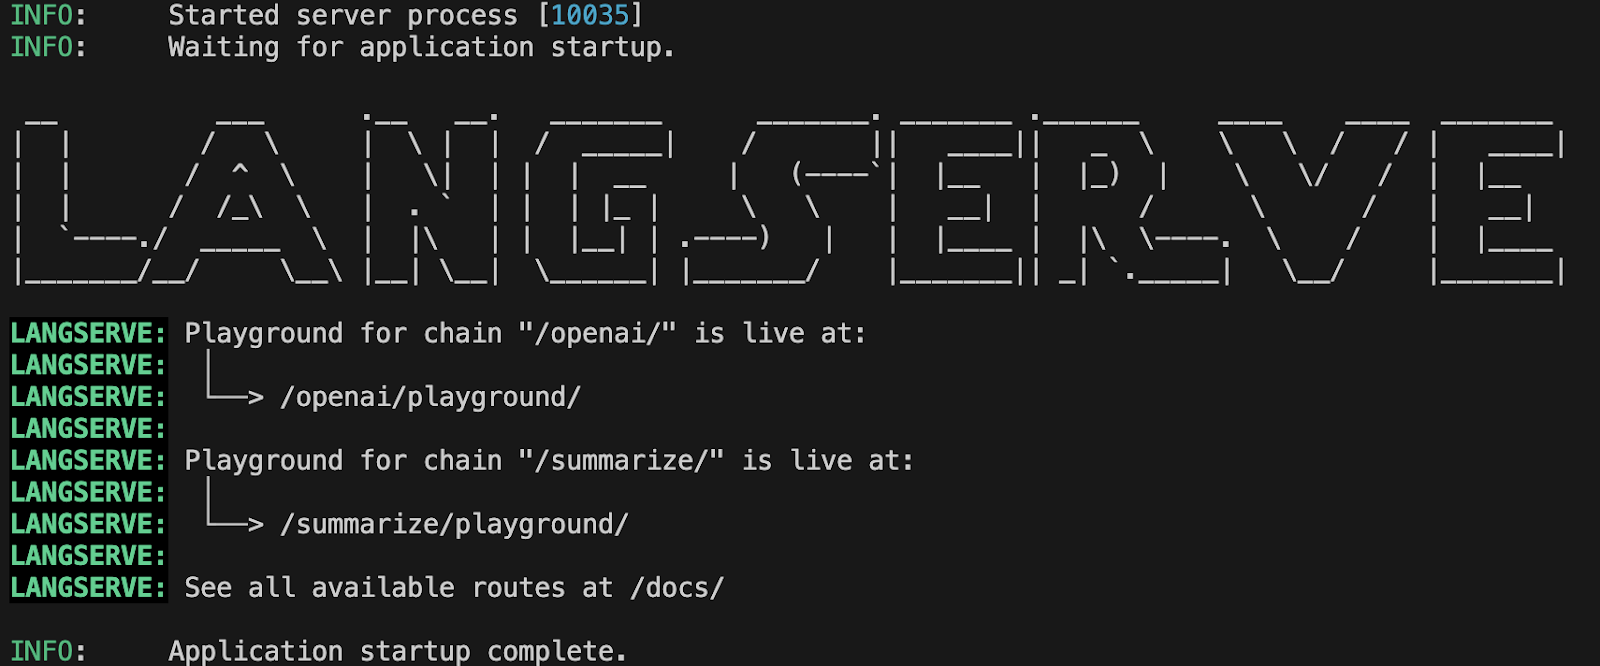 Terminal output showing successful startup of the LangServe application